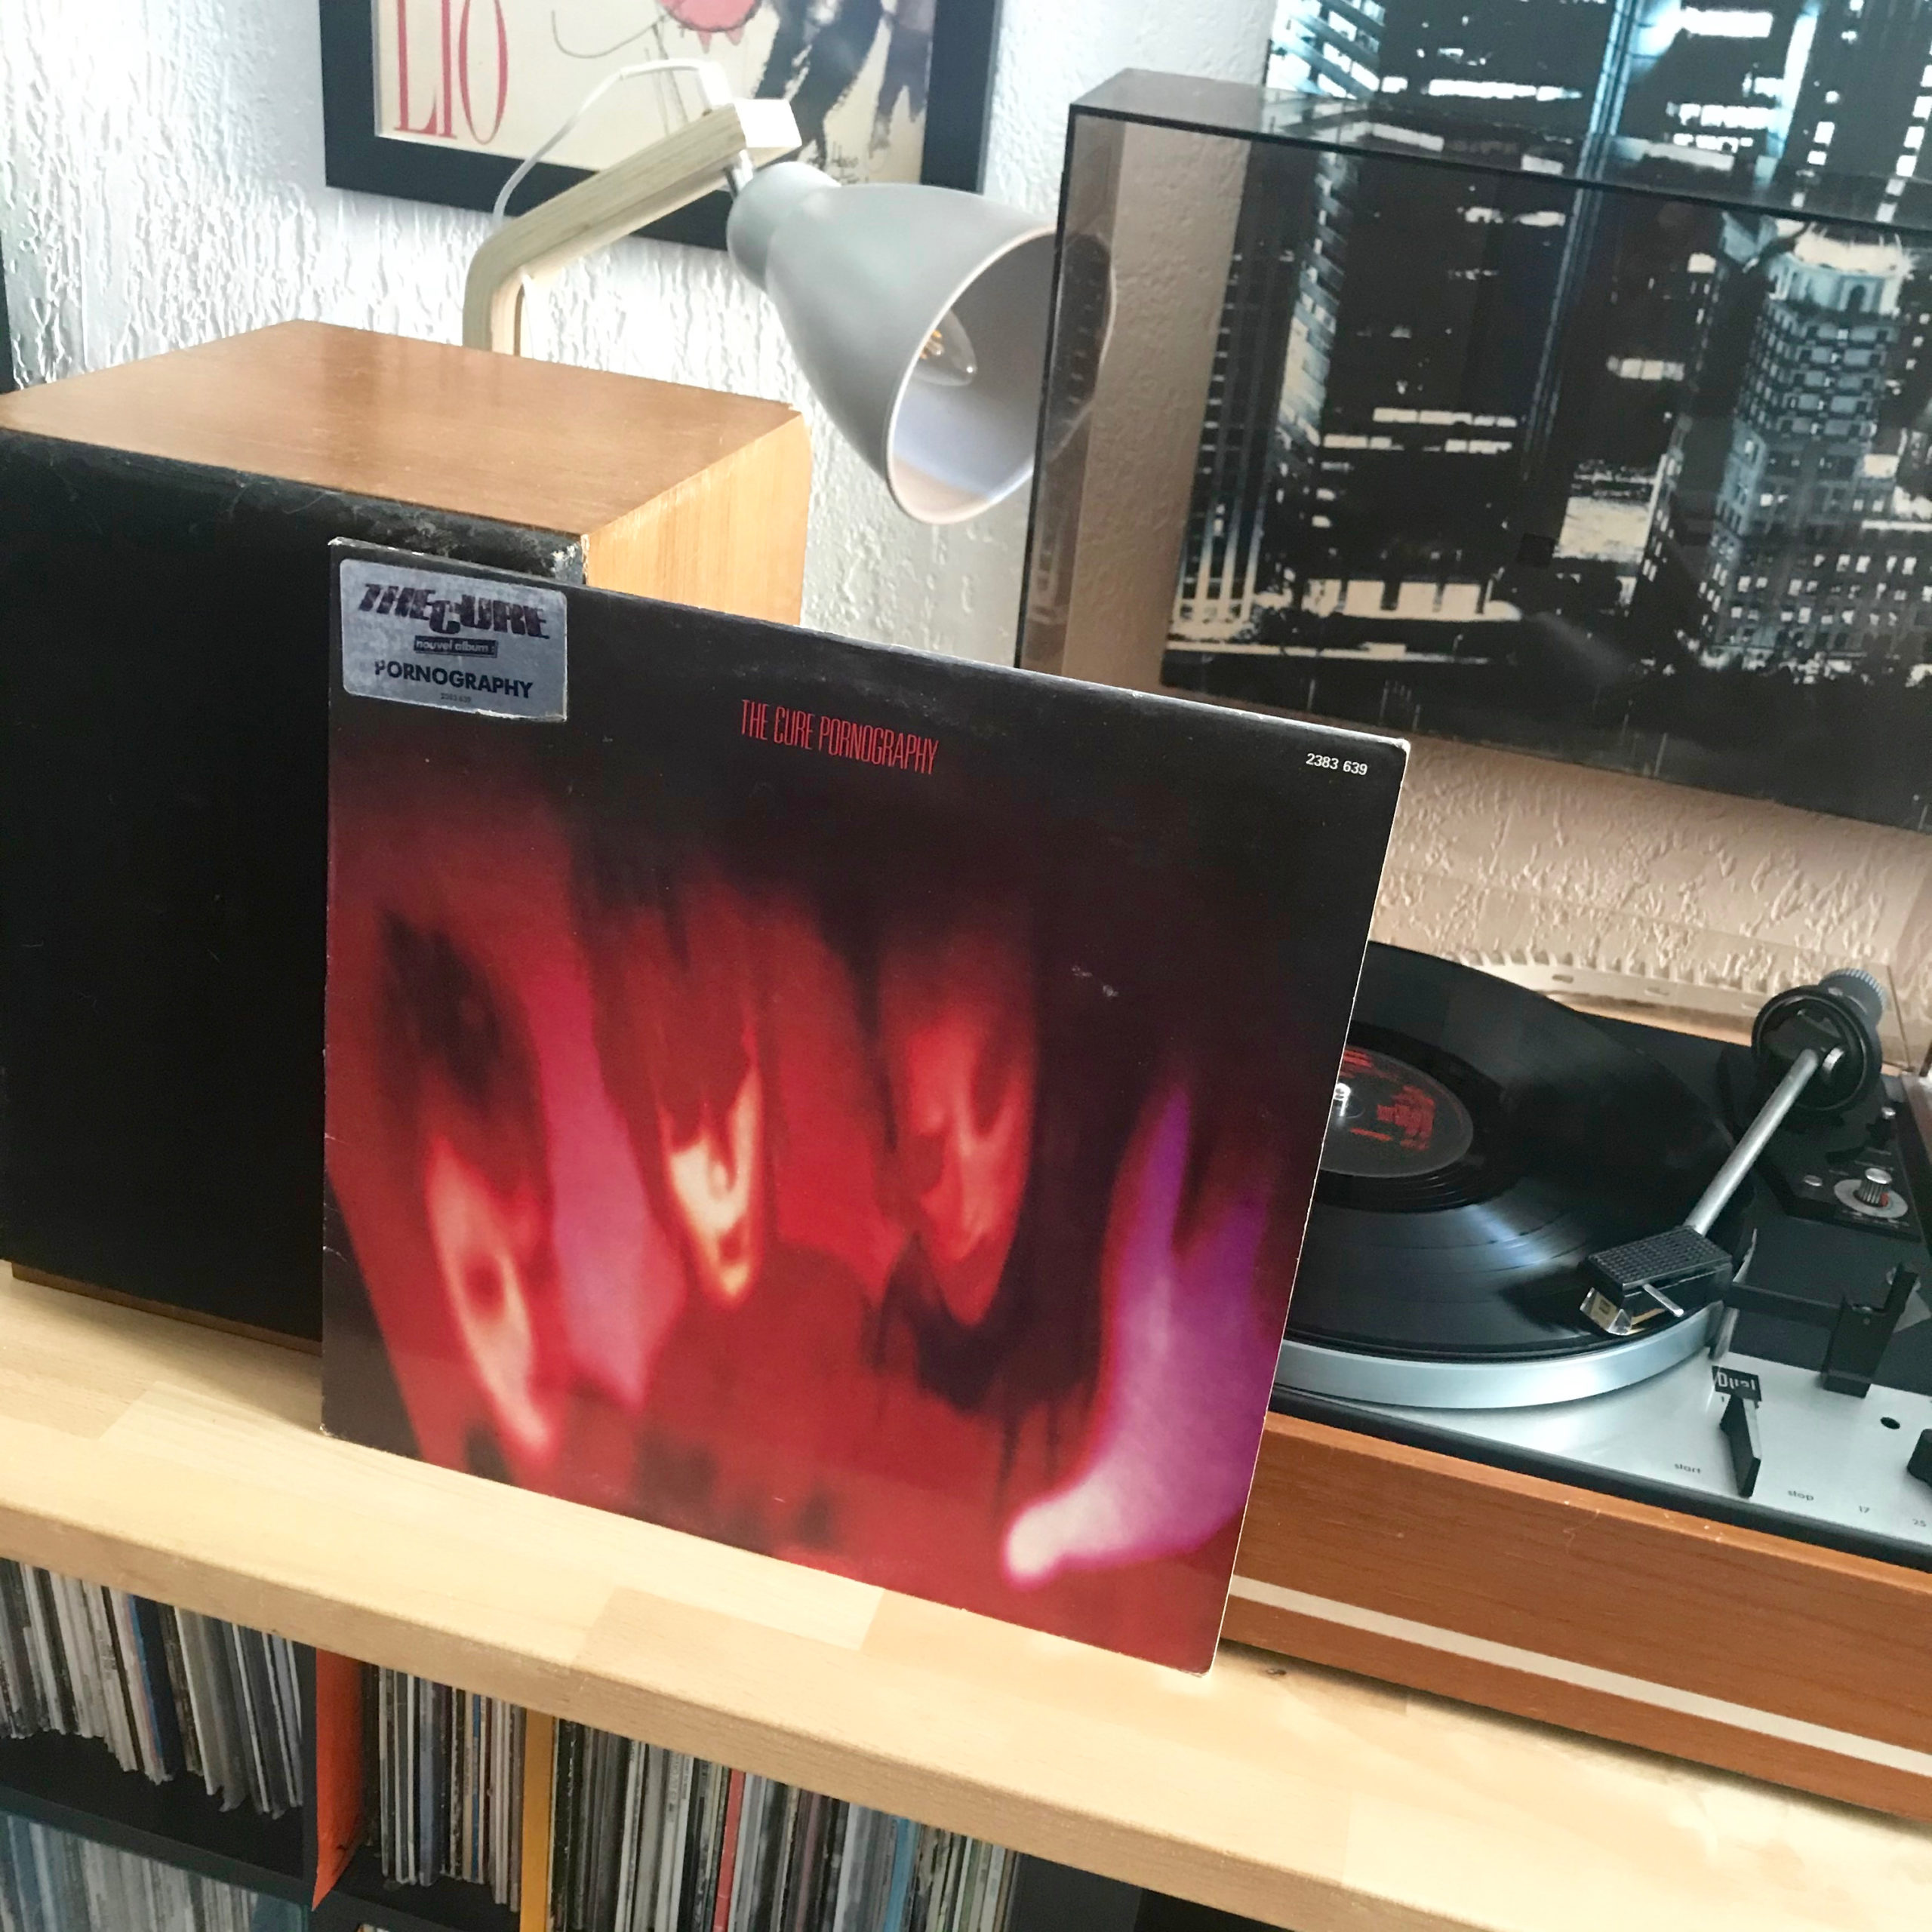 Jour 5 – The Cure, Pornography